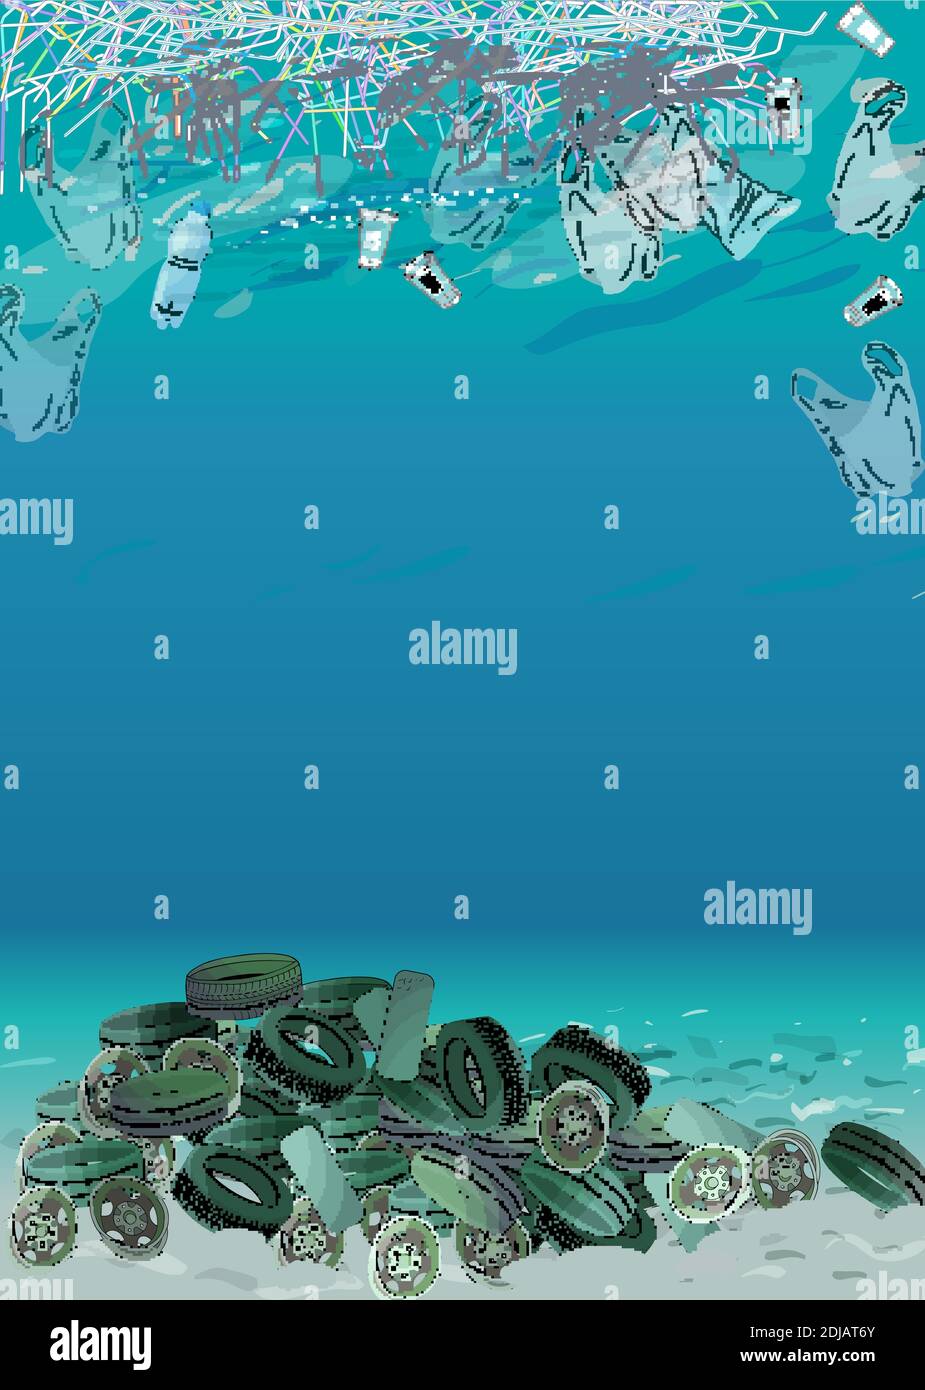 https://c8.alamy.com/comp/2DJAT6Y/template-with-different-kinds-of-garbage-bags-wastes-plastic-straws-and-plastic-utensils-in-the-ocean-or-sea-the-concept-of-ecology-and-world-clea-2DJAT6Y.jpg